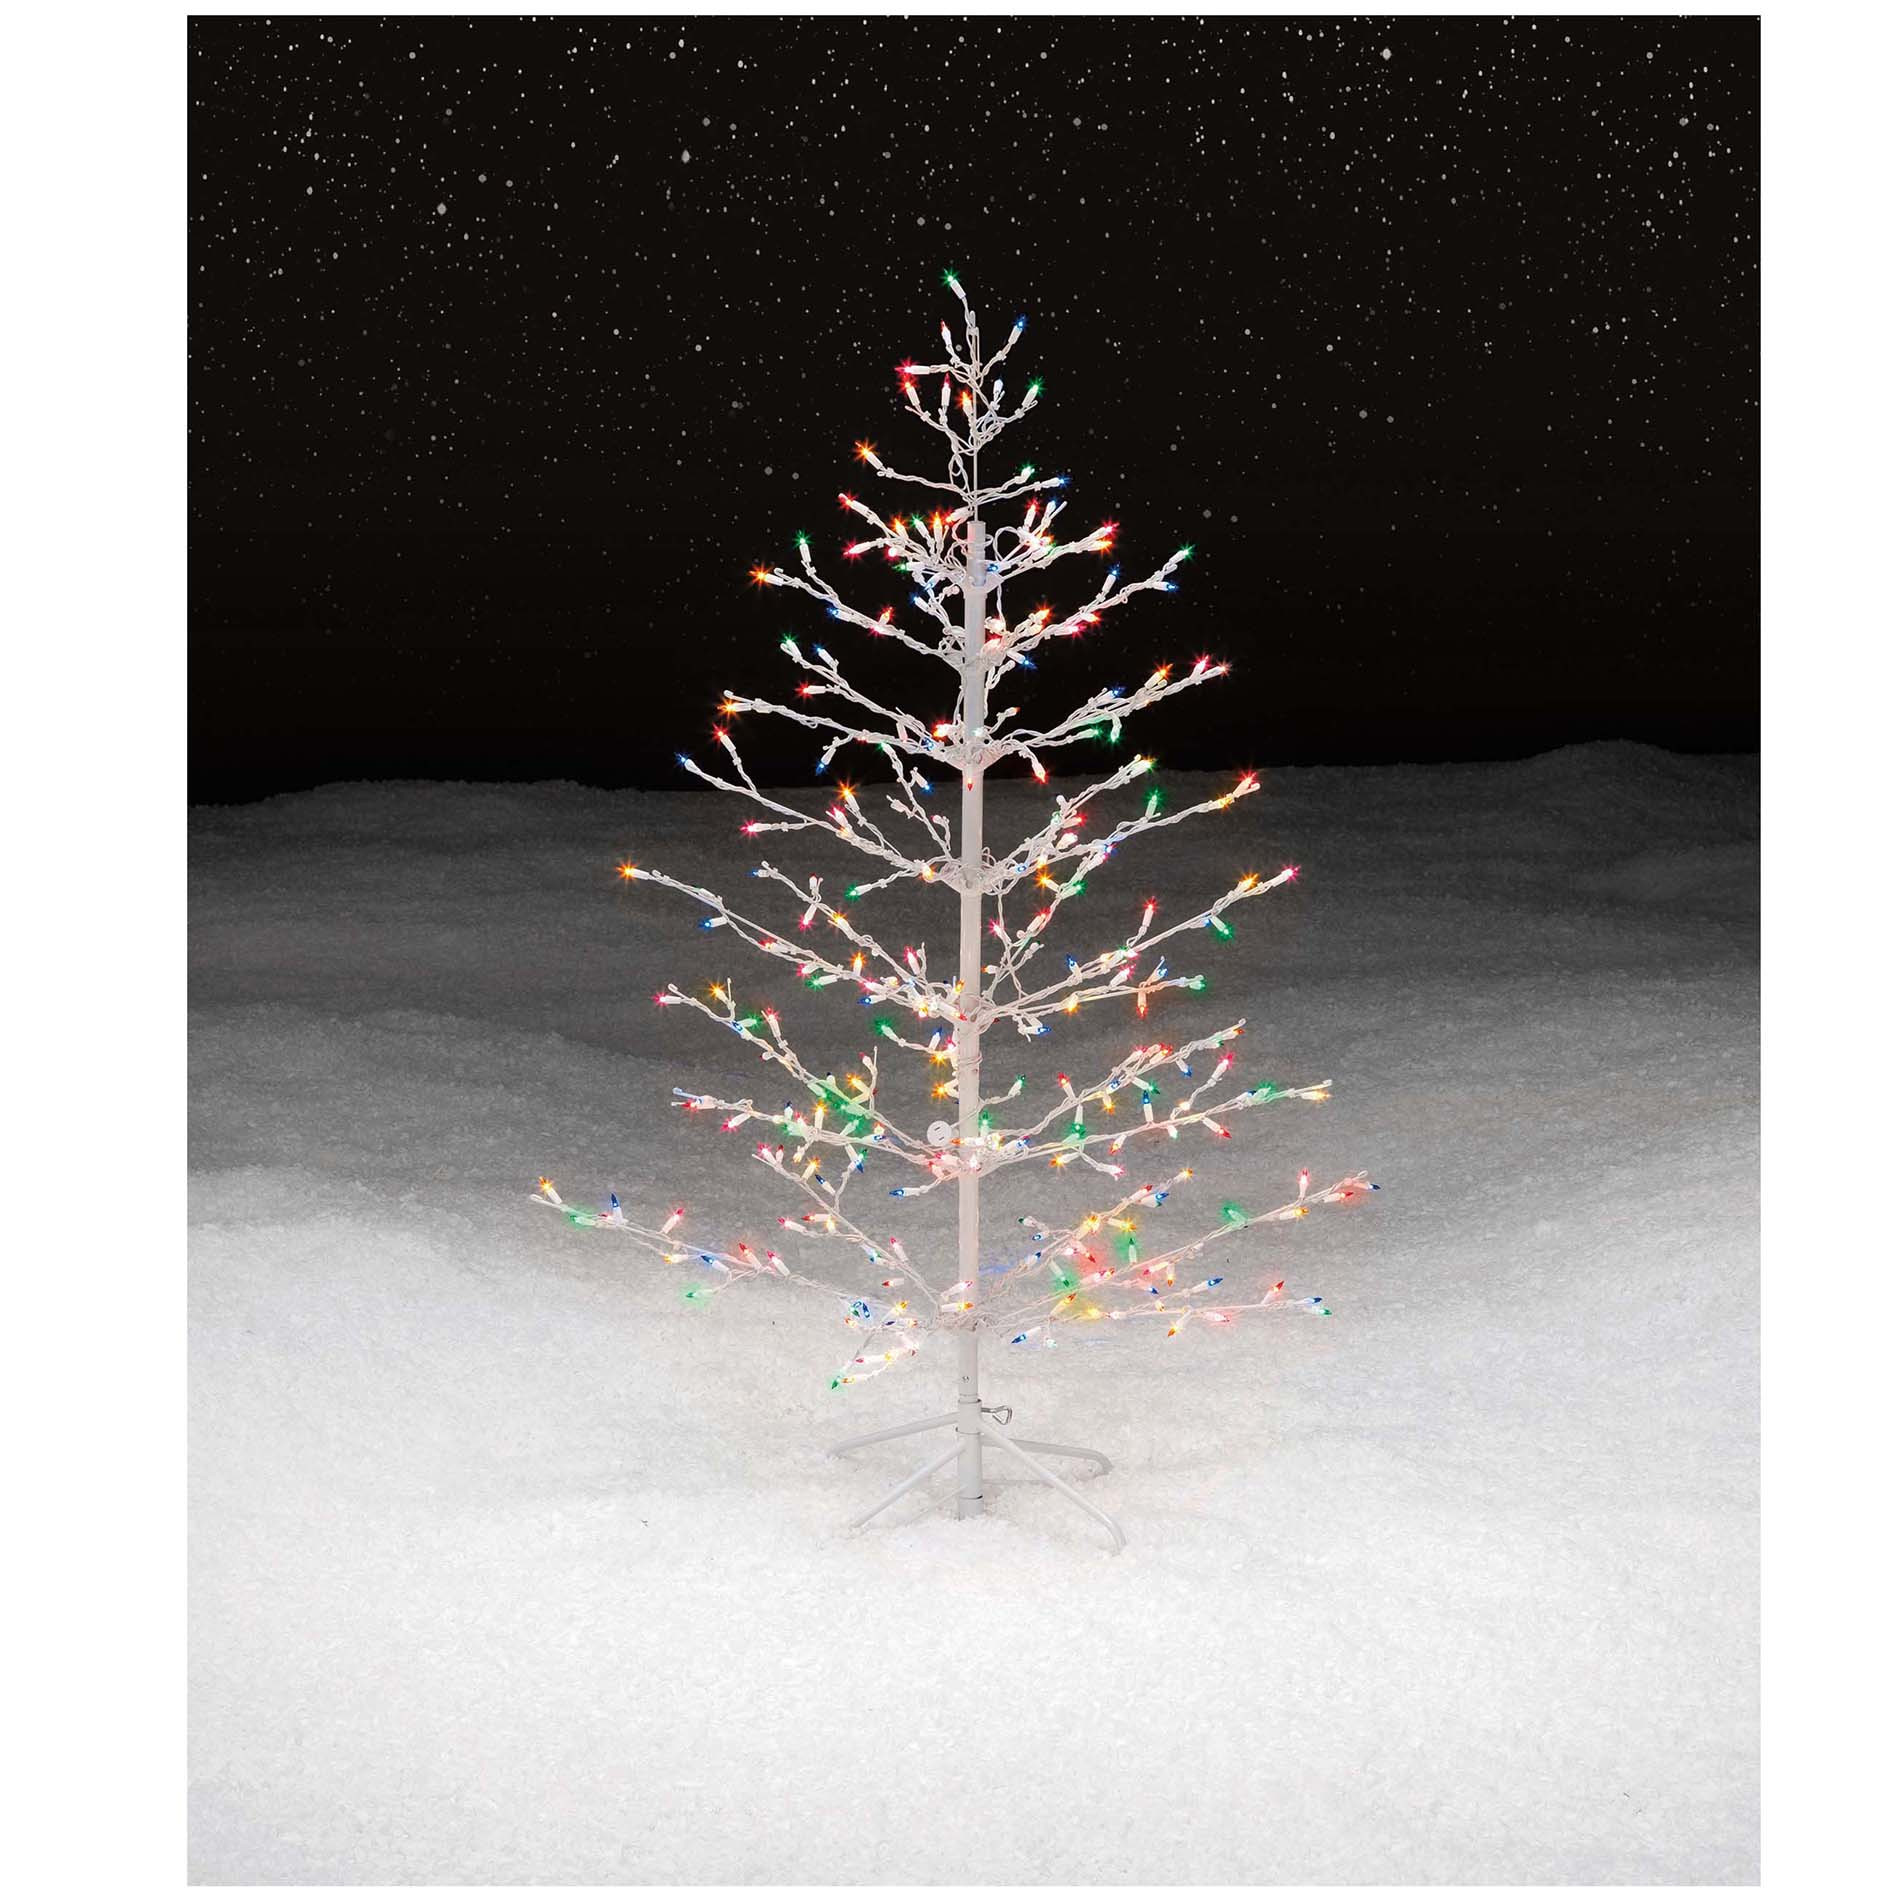 Outdoor Spiral Christmas Trees
 Christmas Tree Spiral Lighted Holiday Decor Indoor Outdoor